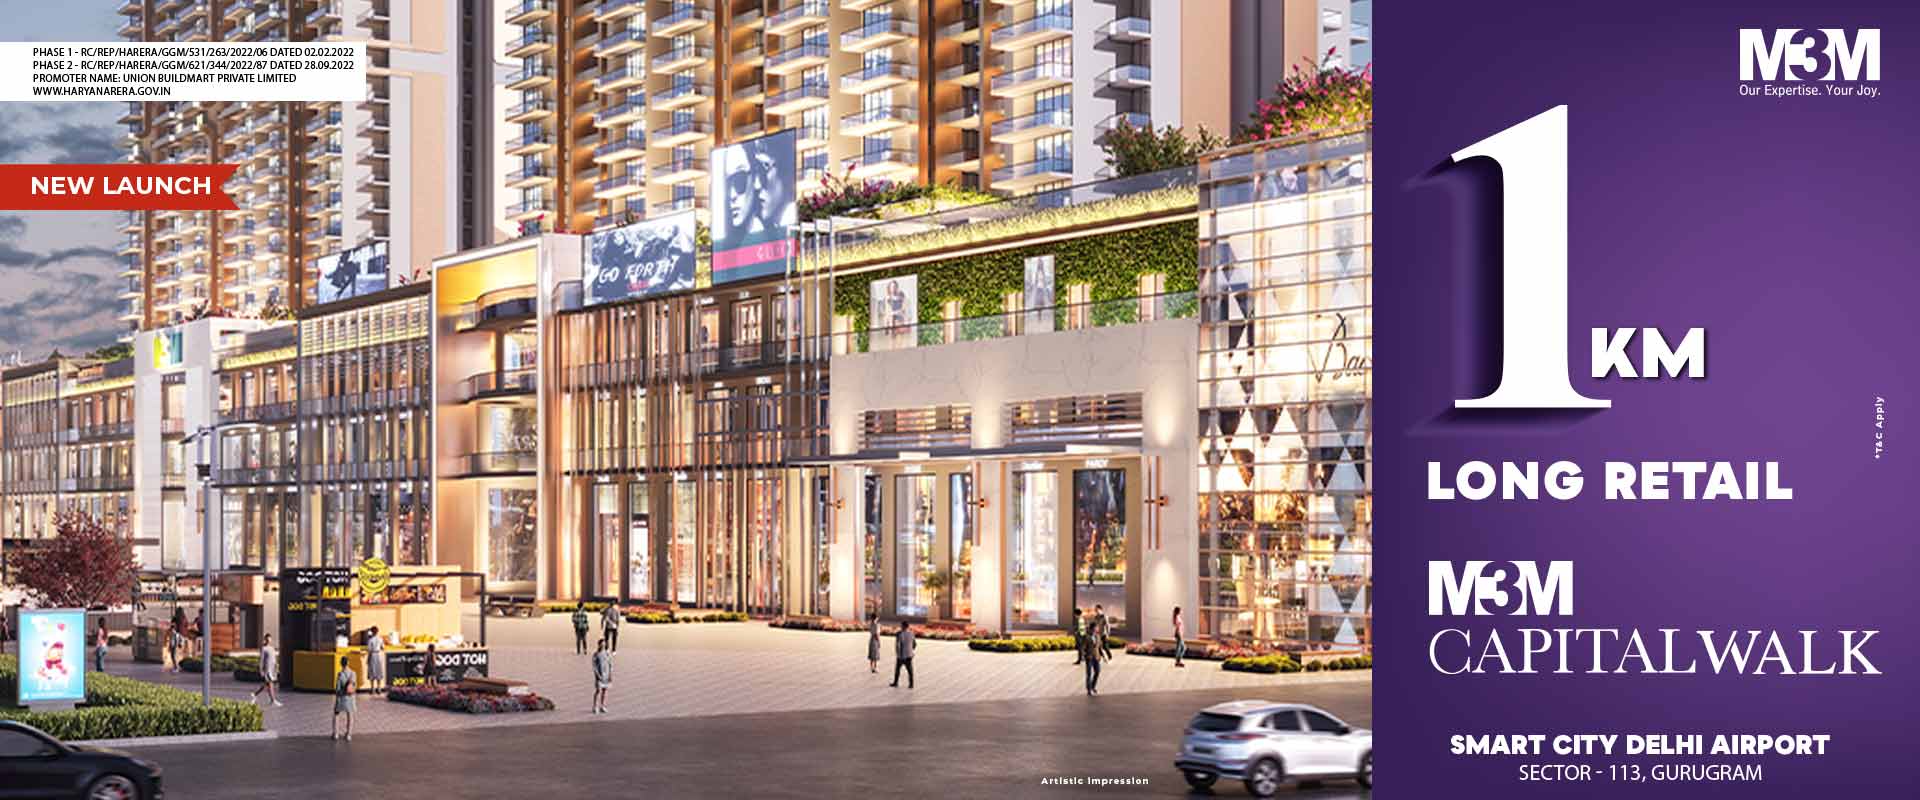 M3M Capital Walk The largest retail experience of Dwarka Expressway, Gurgaon Update